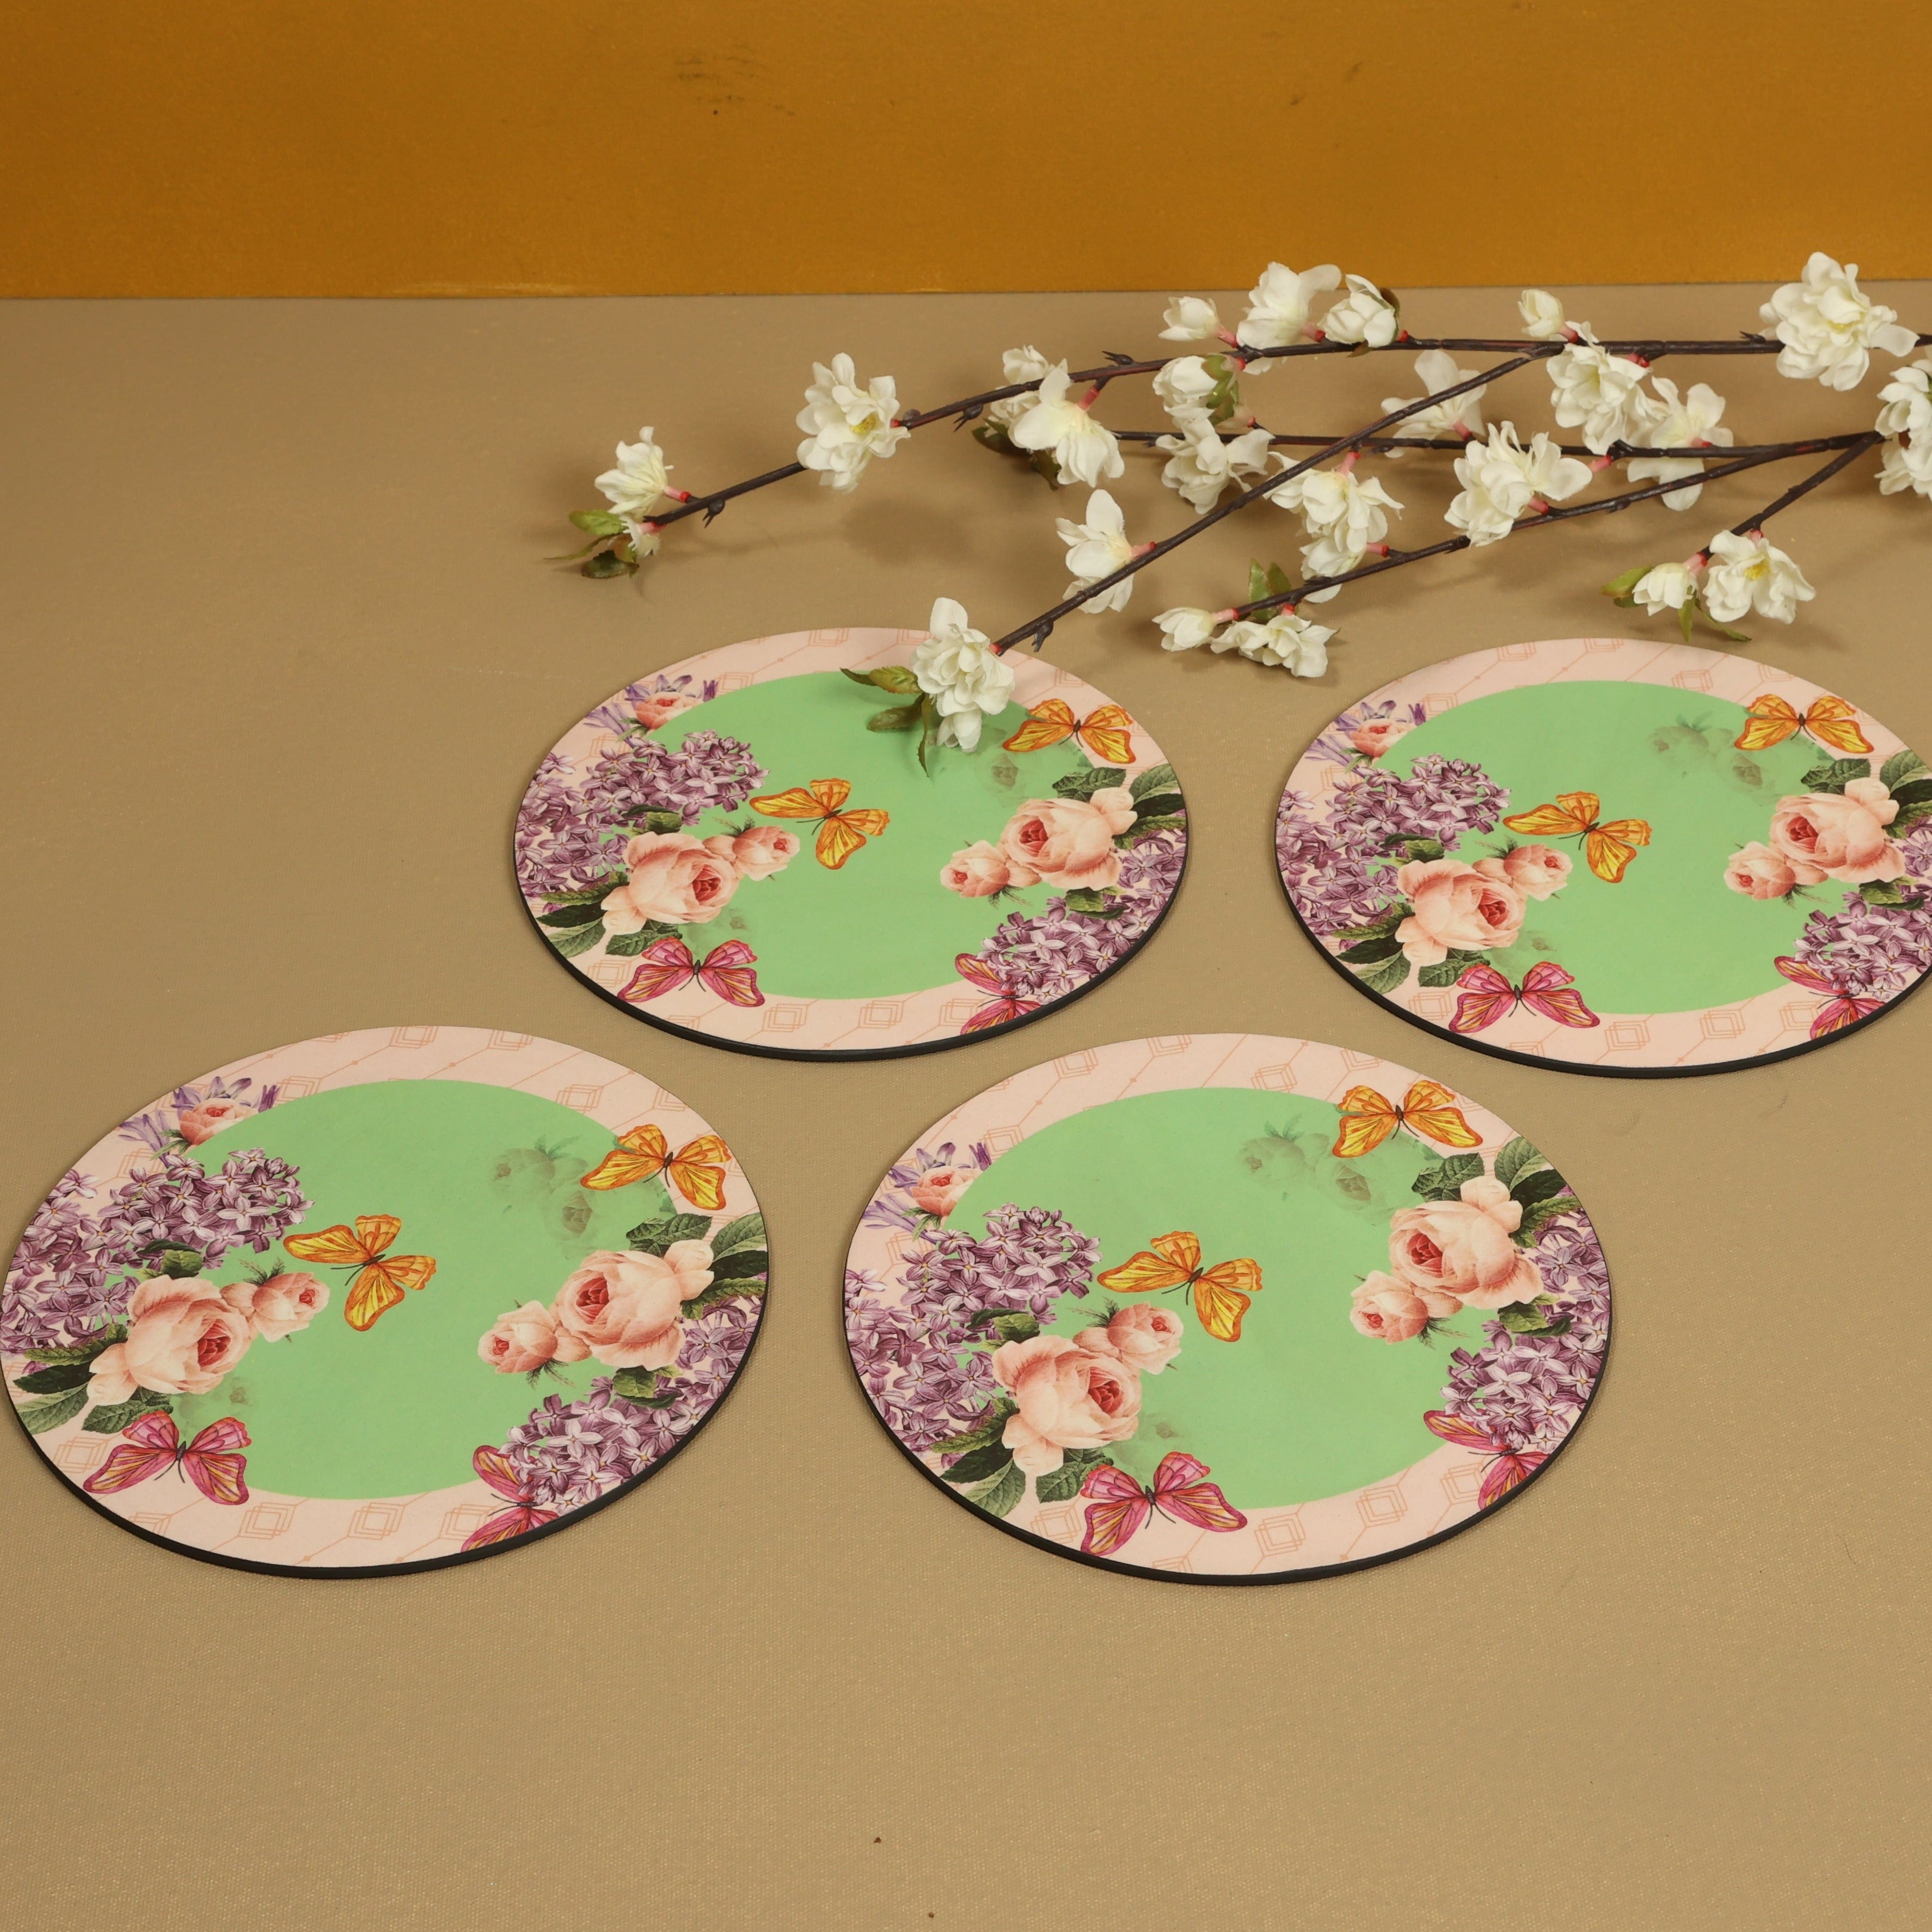 Groovy Mint Series Round Trivets - Set of 6